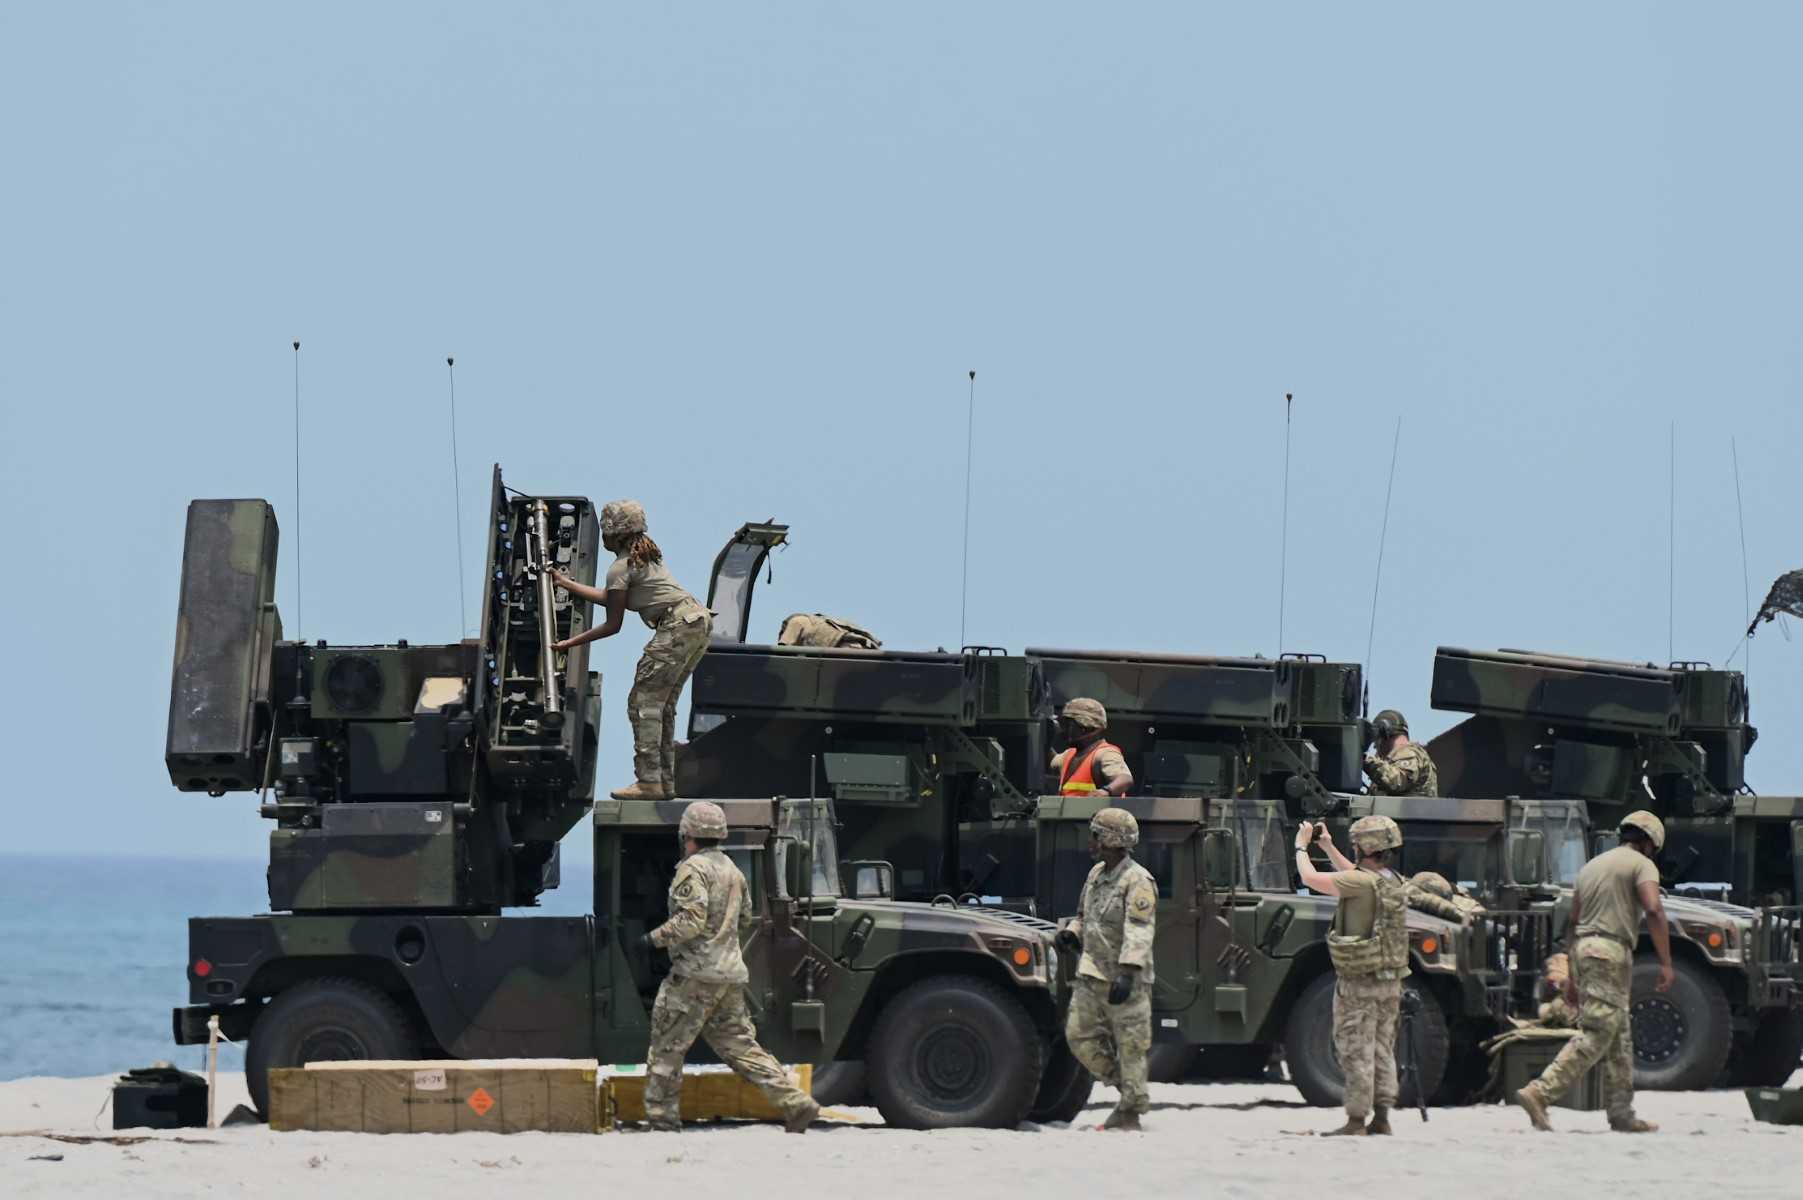 A US soldier loads an Avenger surface-to-air missile system during the US-Philippines Balikatan joint military exercise at San Antonio in Zambales, north of Manila on April 25. Photo: AFP